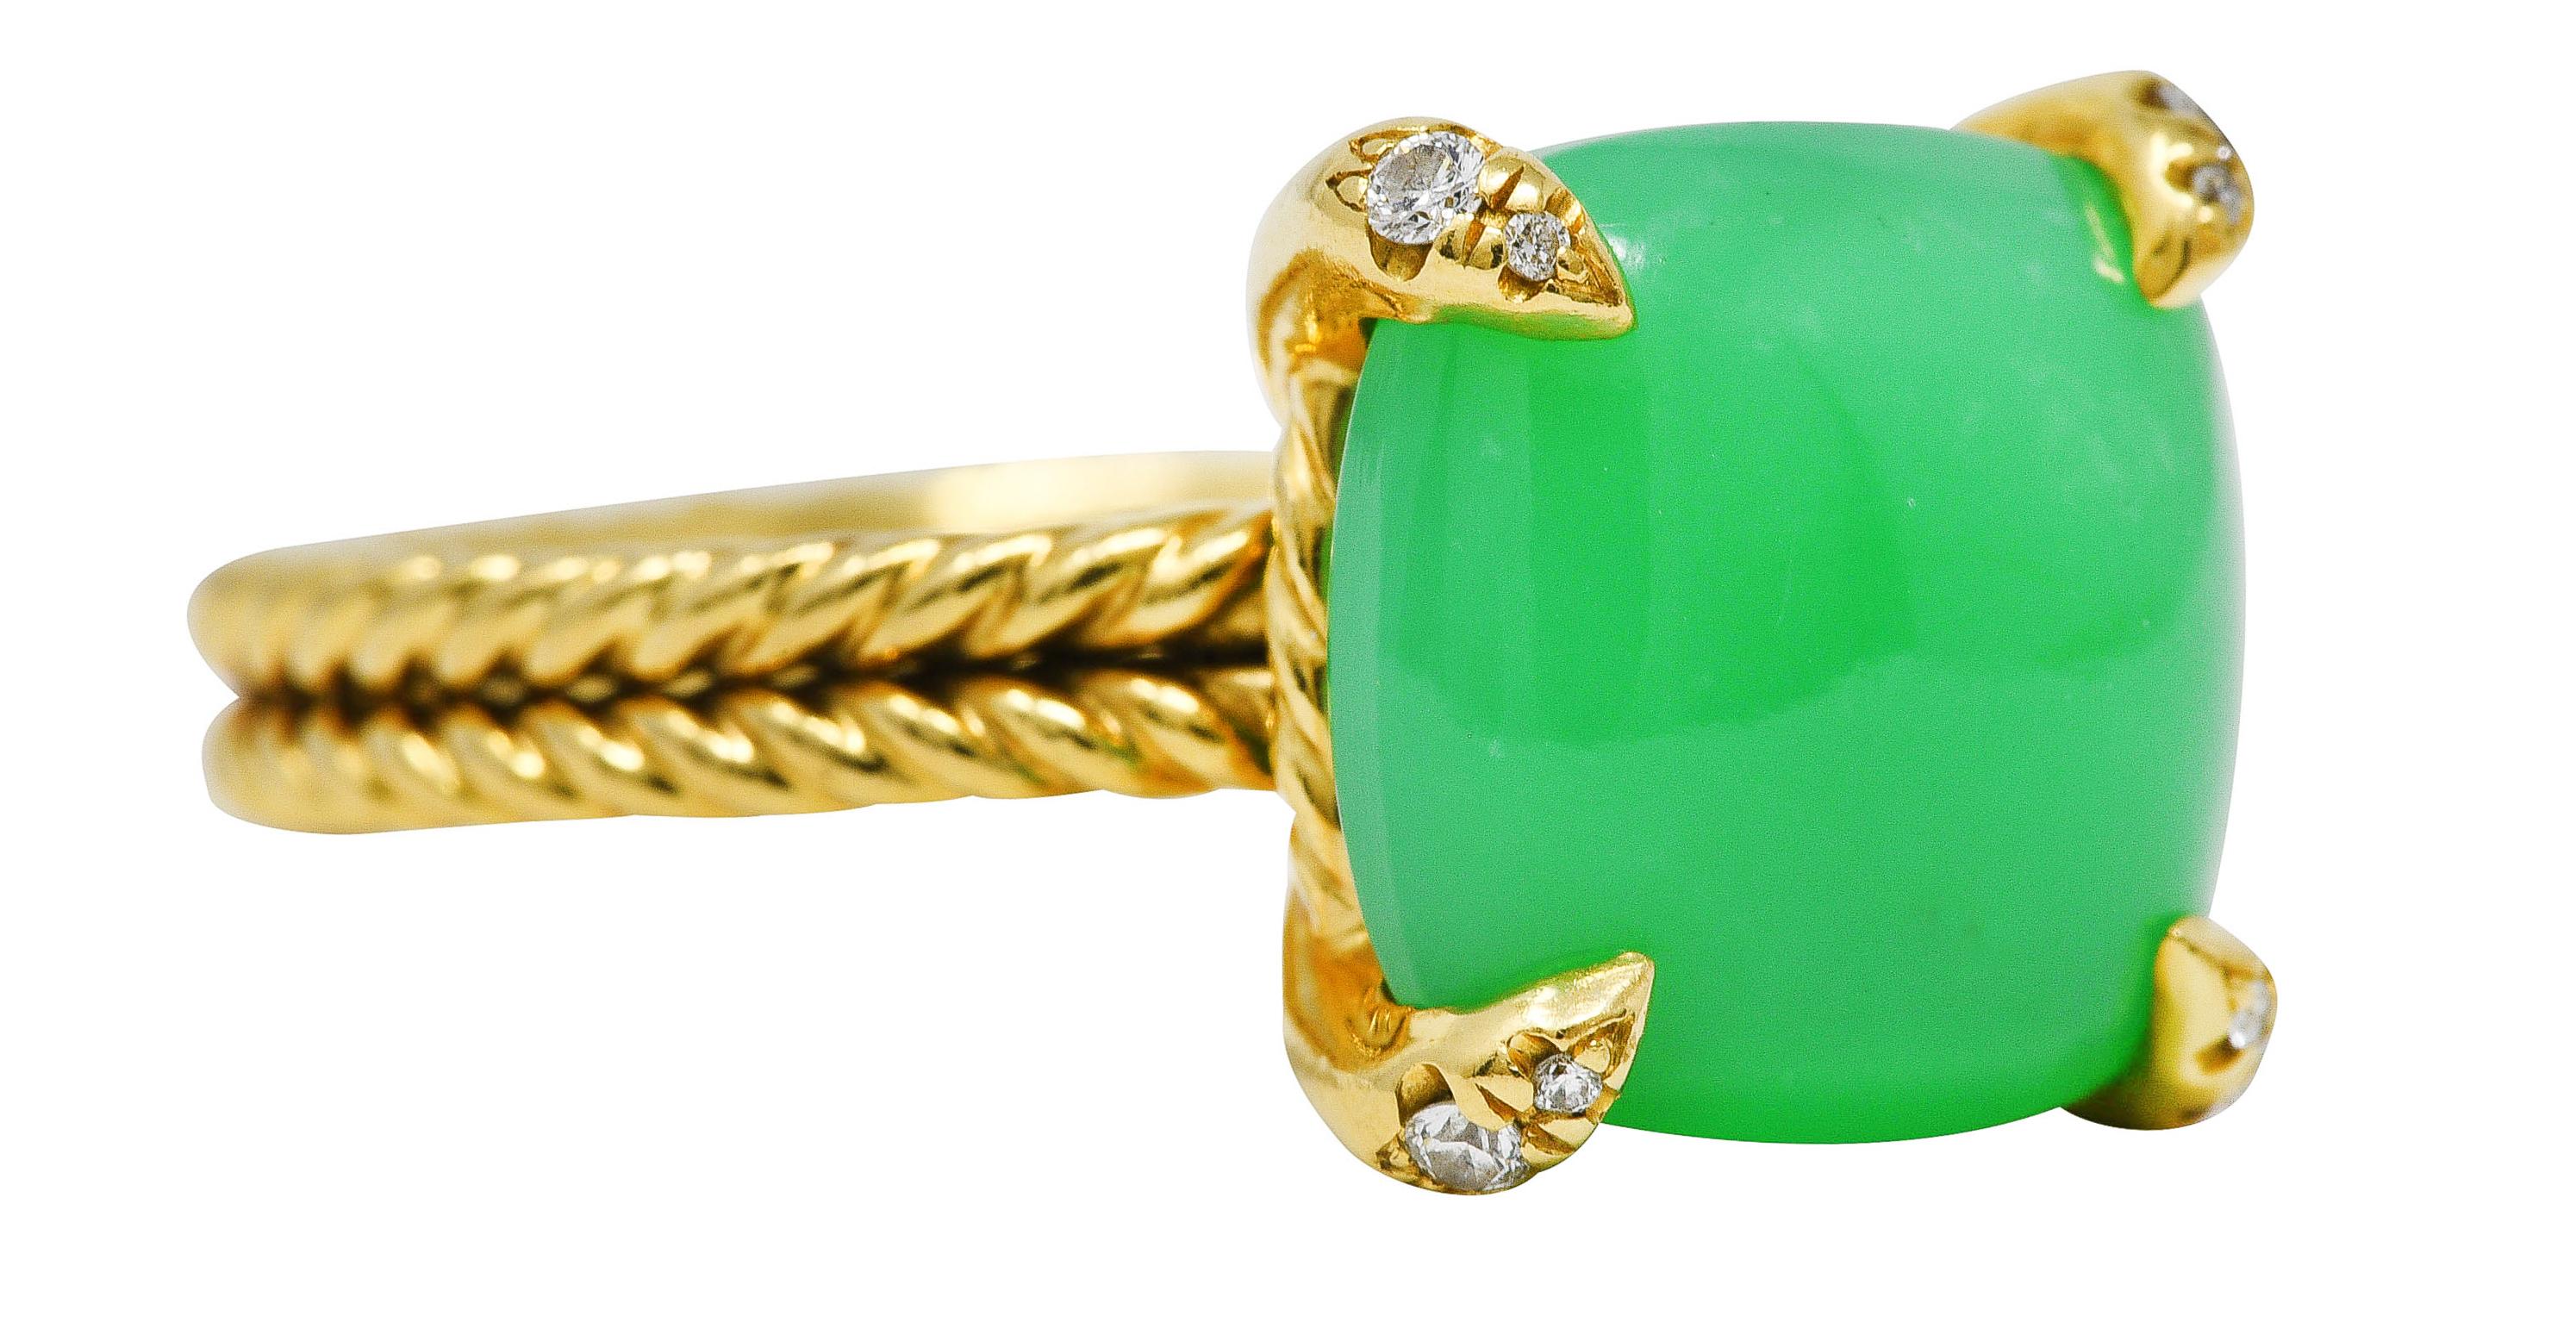 Gold mounting is comprised of Yurman's staple twisted cable motif. Featuring an 11.0 mm cushion shaped double cabochon of chrysoprase chalcedony. Translucent with slightly bluish and strong green color. Claw set with diamond accented prongs. Round